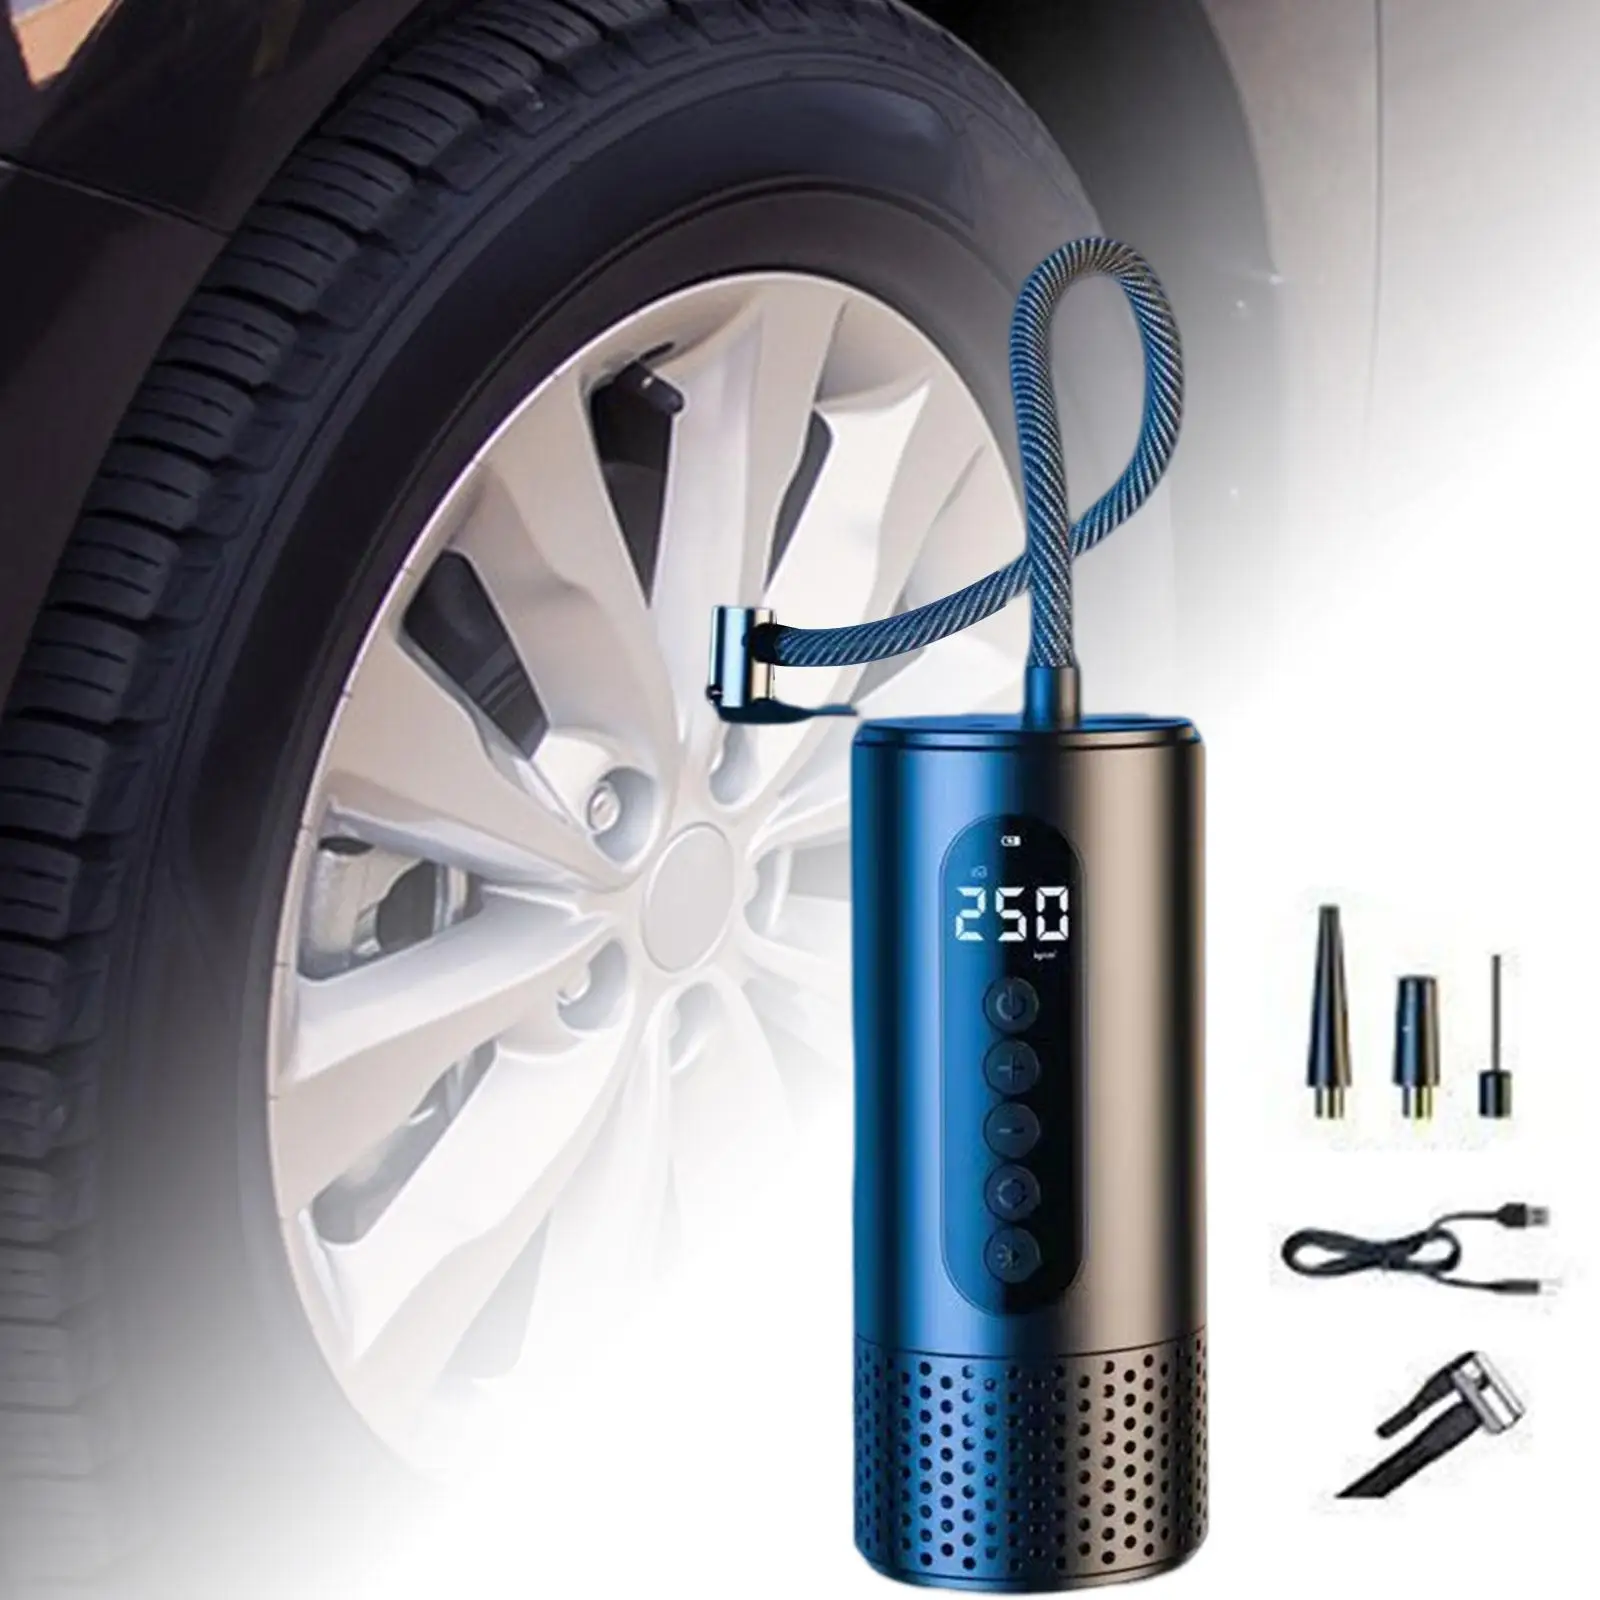 Tyre Inflator Air Compressor with LED Light LCD Display Easy Operation Low Noise